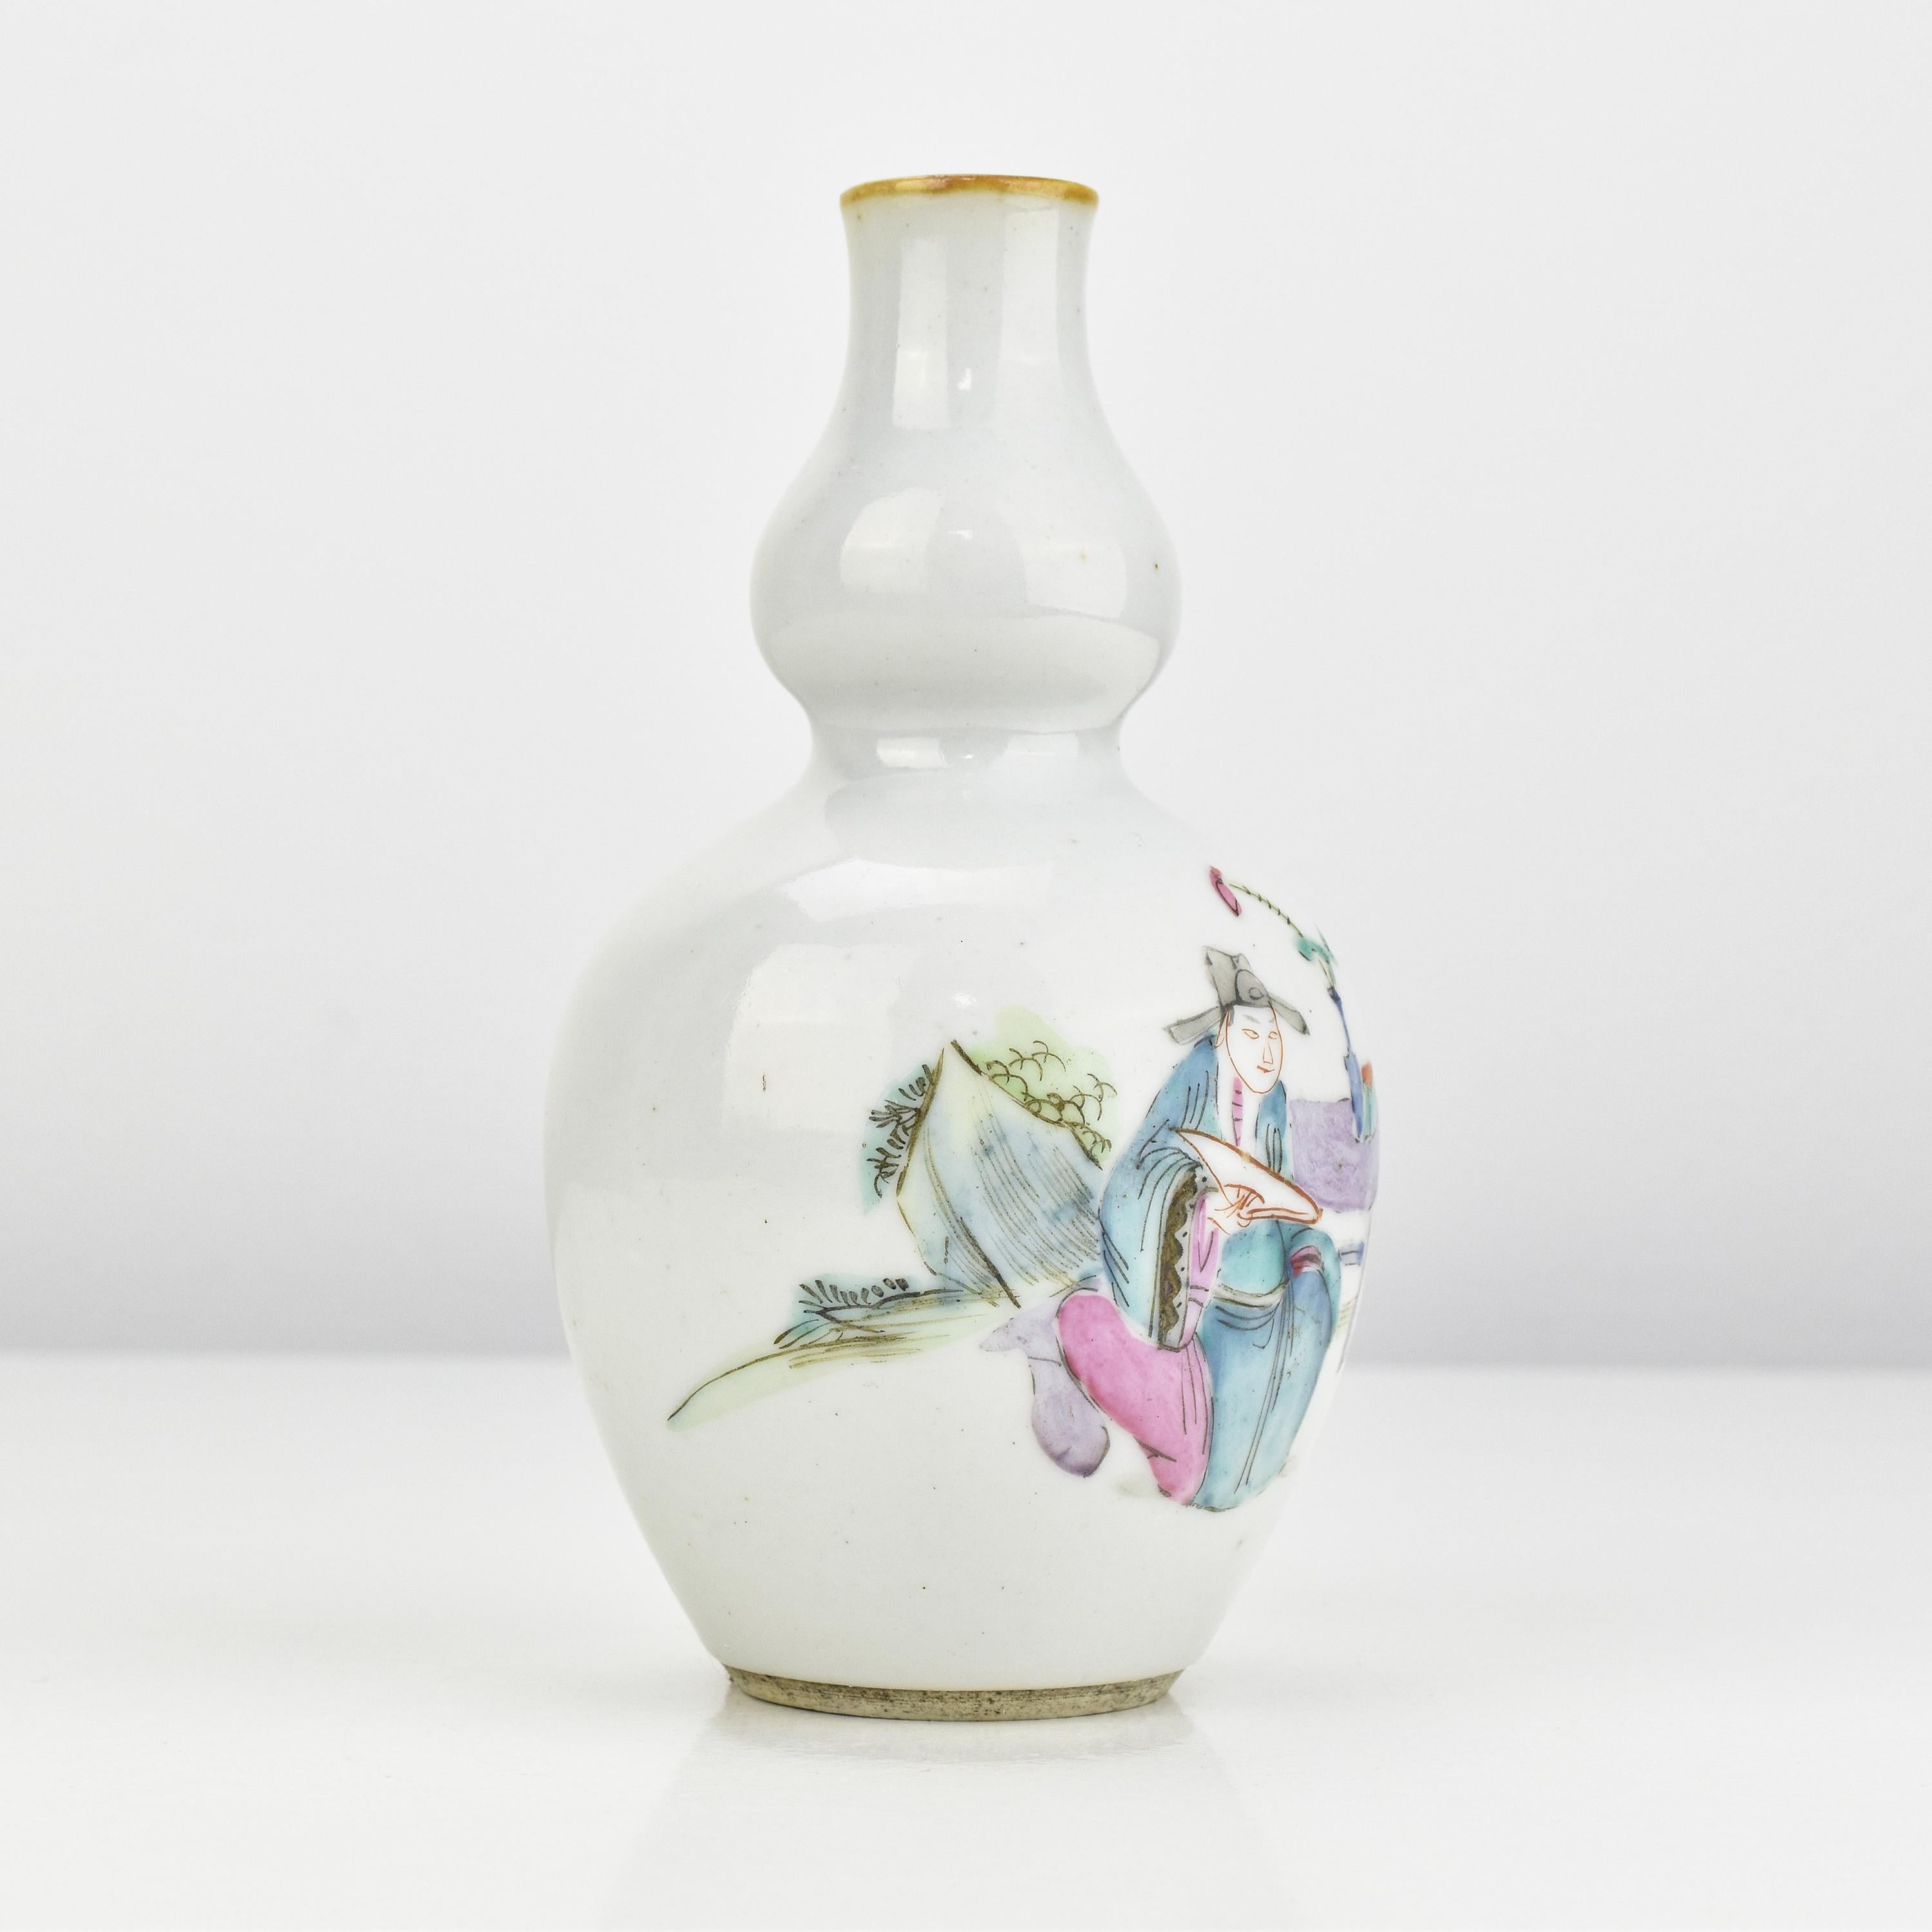 Antique Chinese Famille Rose Vase with Hand-Painted Enamels Qing Dynasty

This lovely small antique Chinese Famille Rose vase hails from the late 19th century and is crafted from fine porcelain, it showcases intricately hand-painted enamels of three